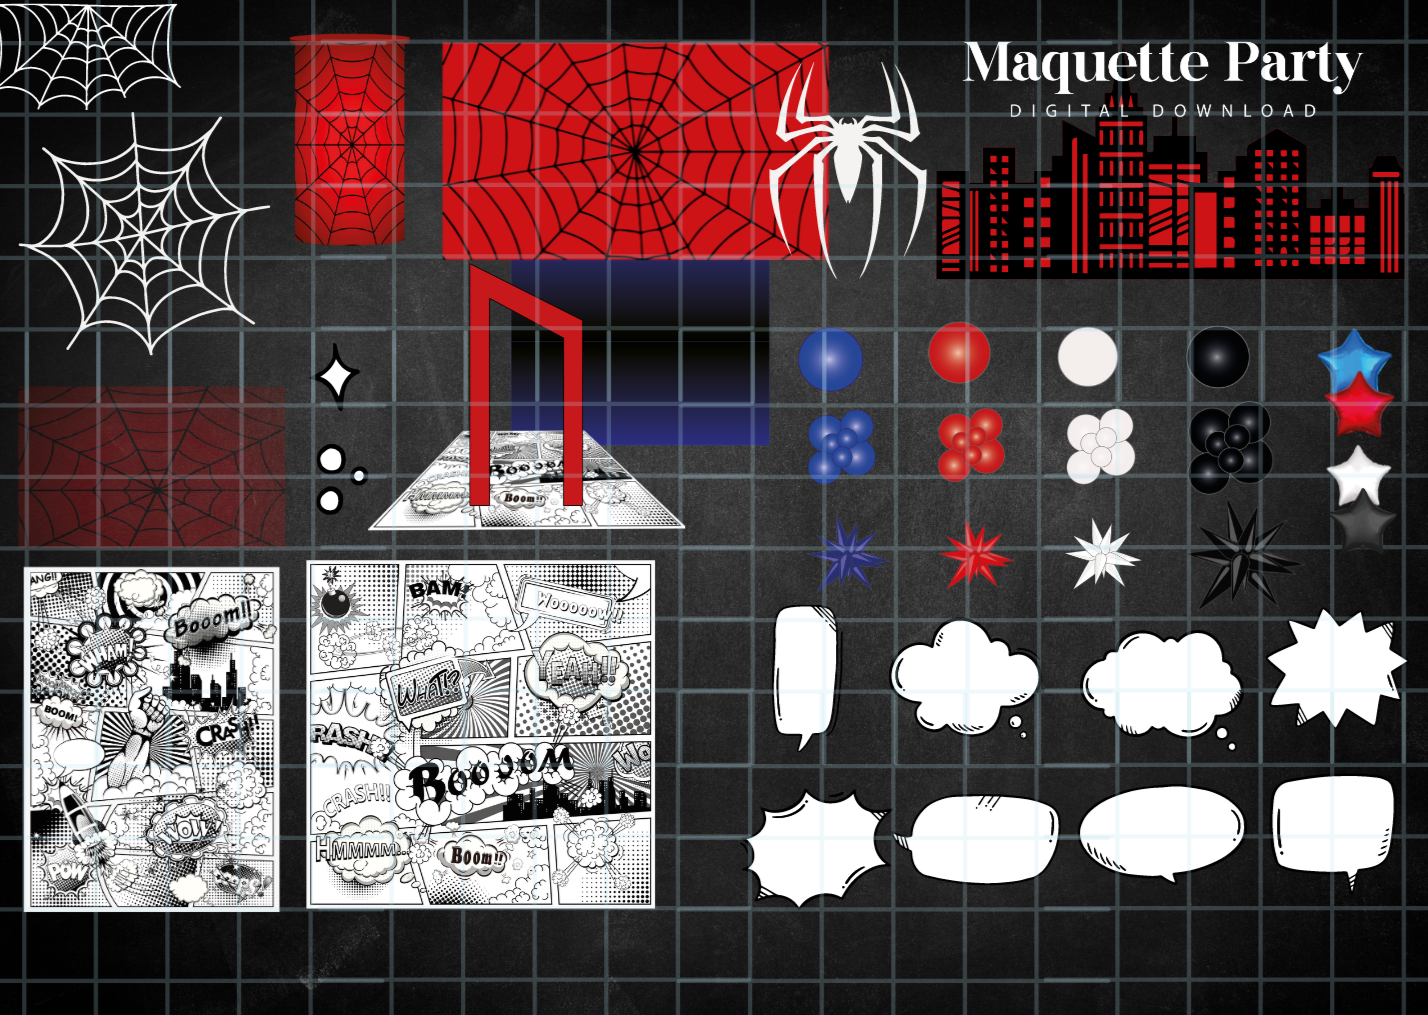 Spiderman party – Maquette Party